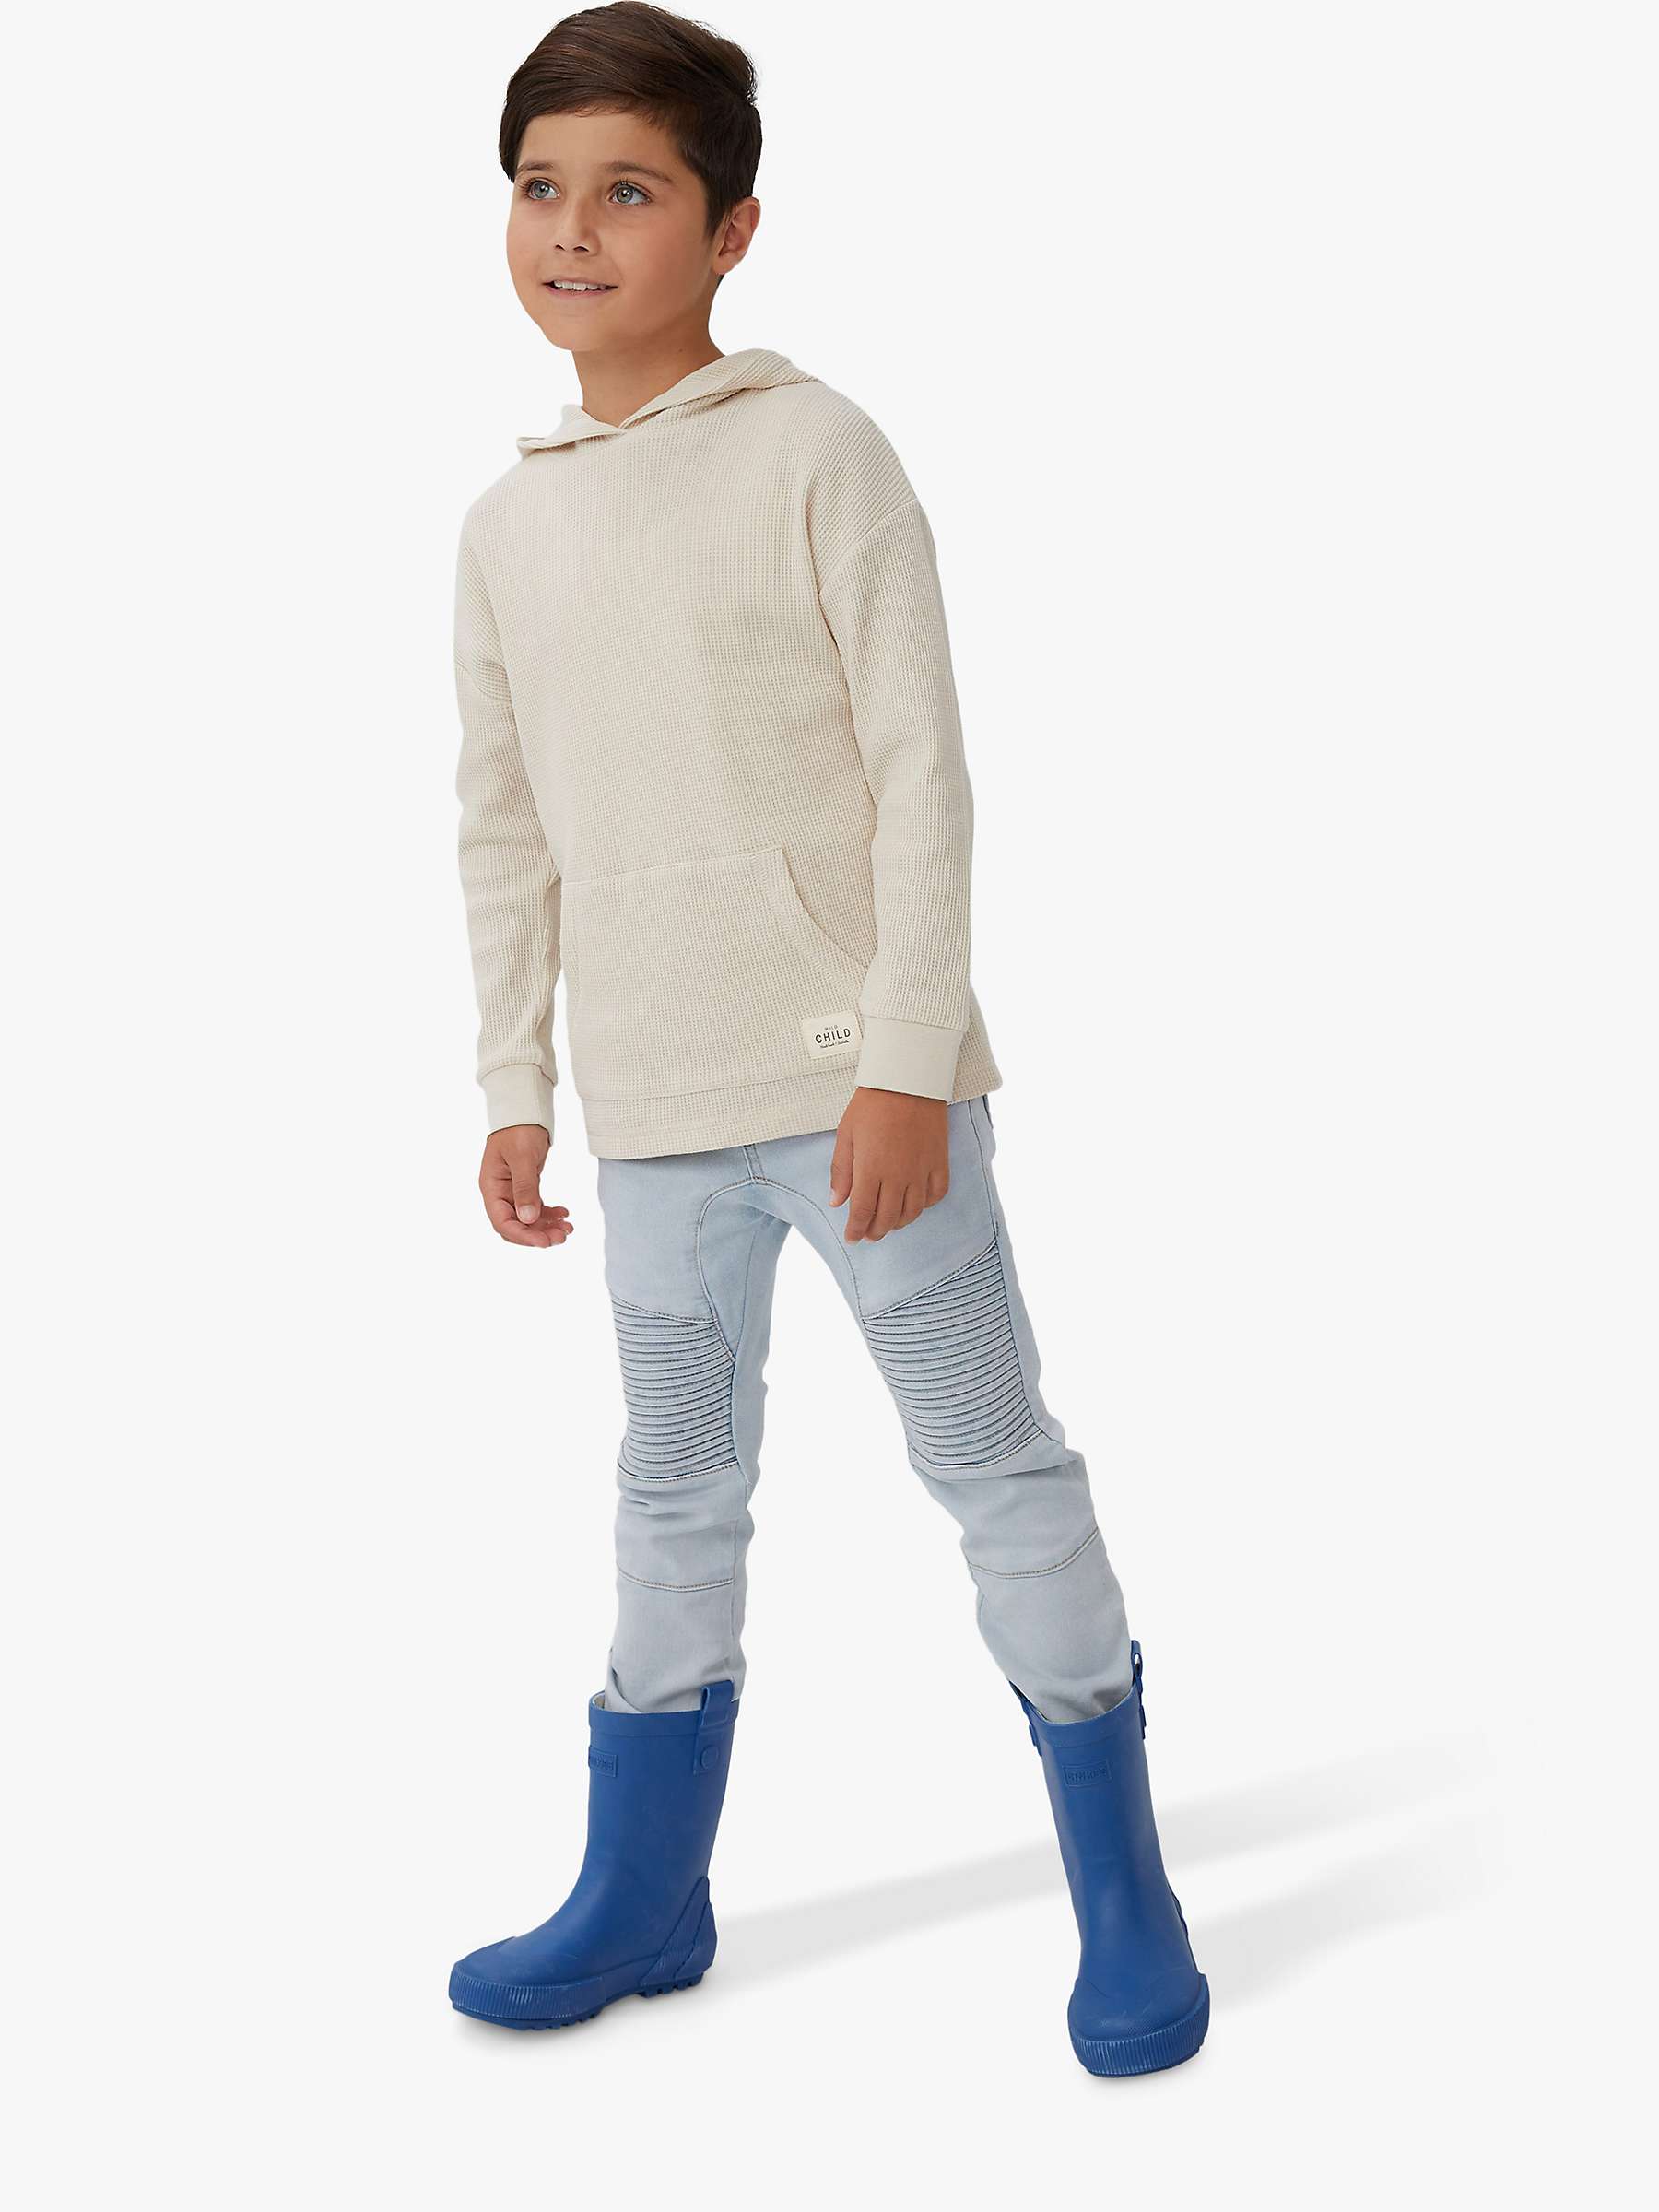 Buy Cotton On Kids' Waffle Knit Hoodie Online at johnlewis.com